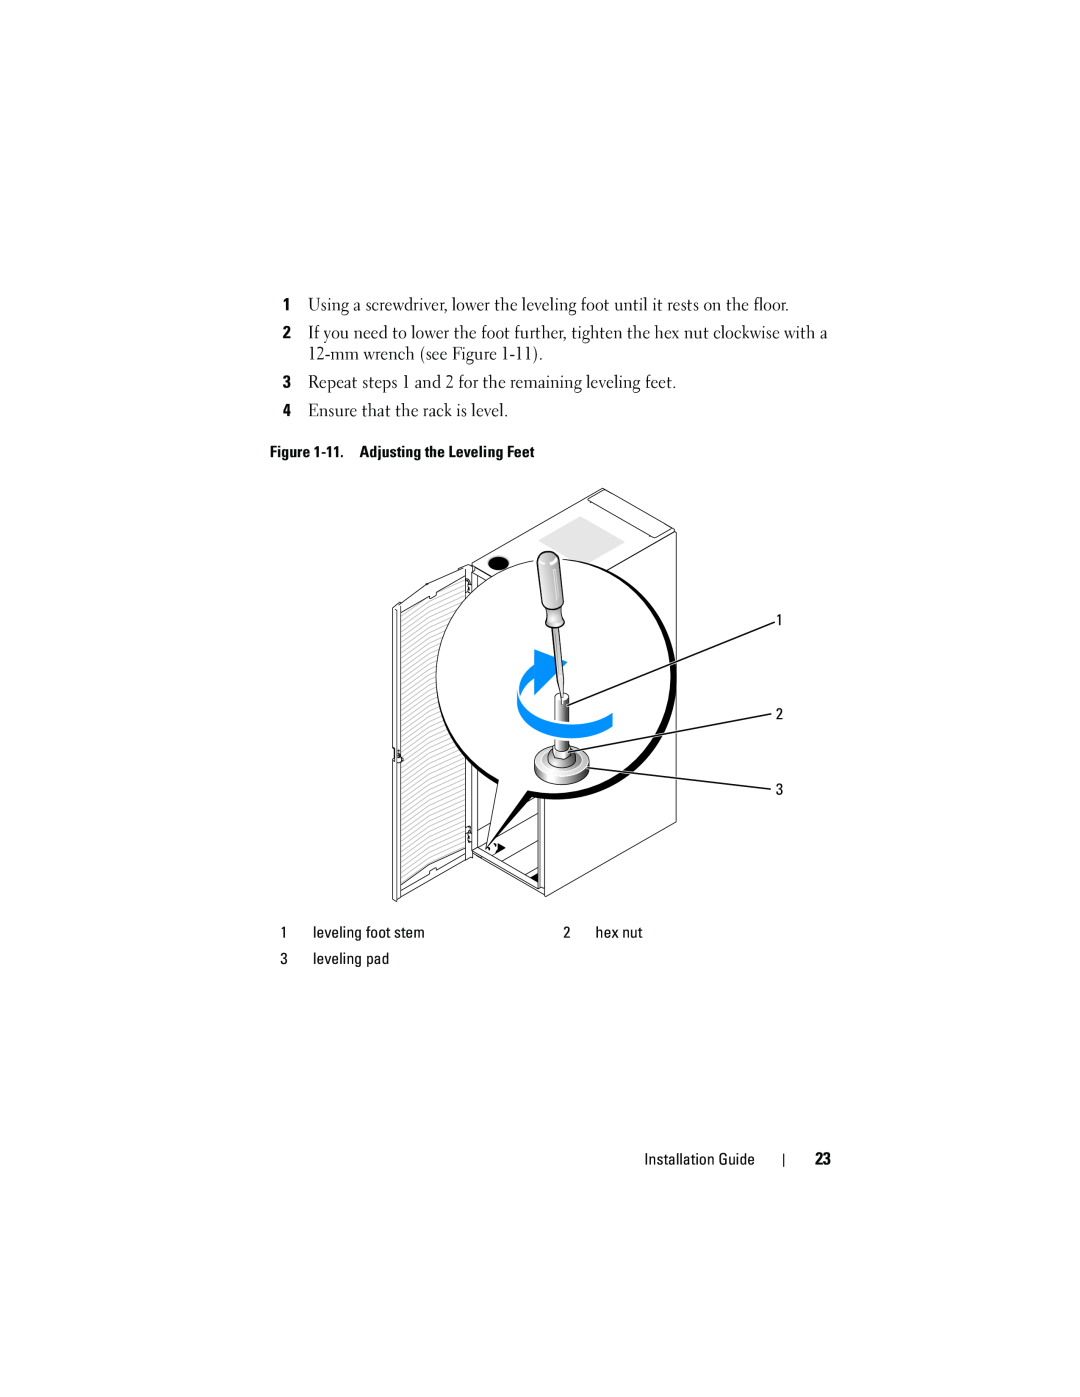 Dell 4220 manual 11. Adjusting the Leveling Feet, leveling foot stem, leveling pad, Installation Guide, hex nut 